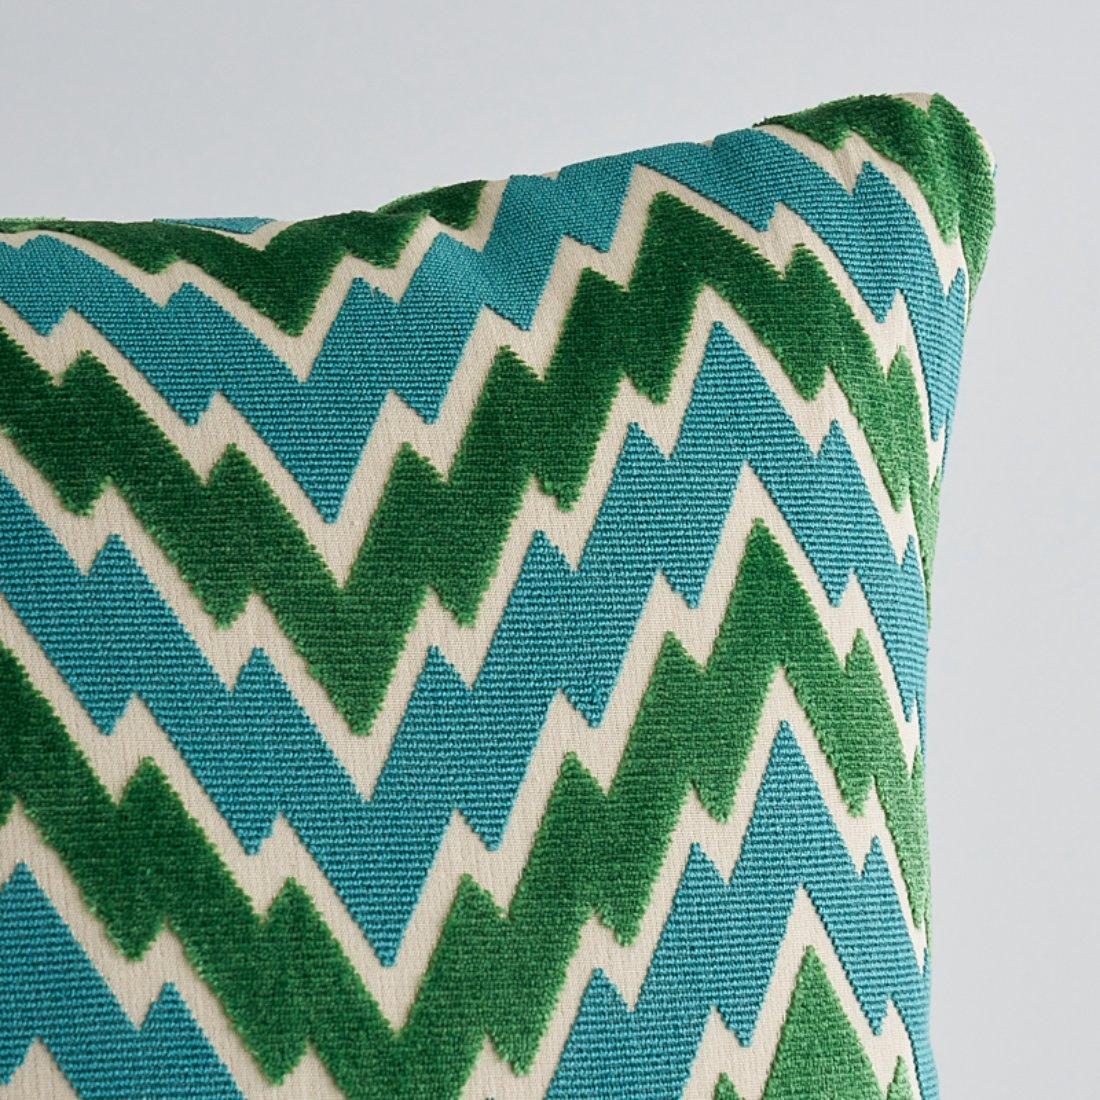 This pillow features Florentine Chevron with a knife edge finish. Ooh la la! This exquisite, high-style cut velvet is just what you need when you want to add some oomph to a room. The mid-scale pattern features an allover, irregular chevron that’s